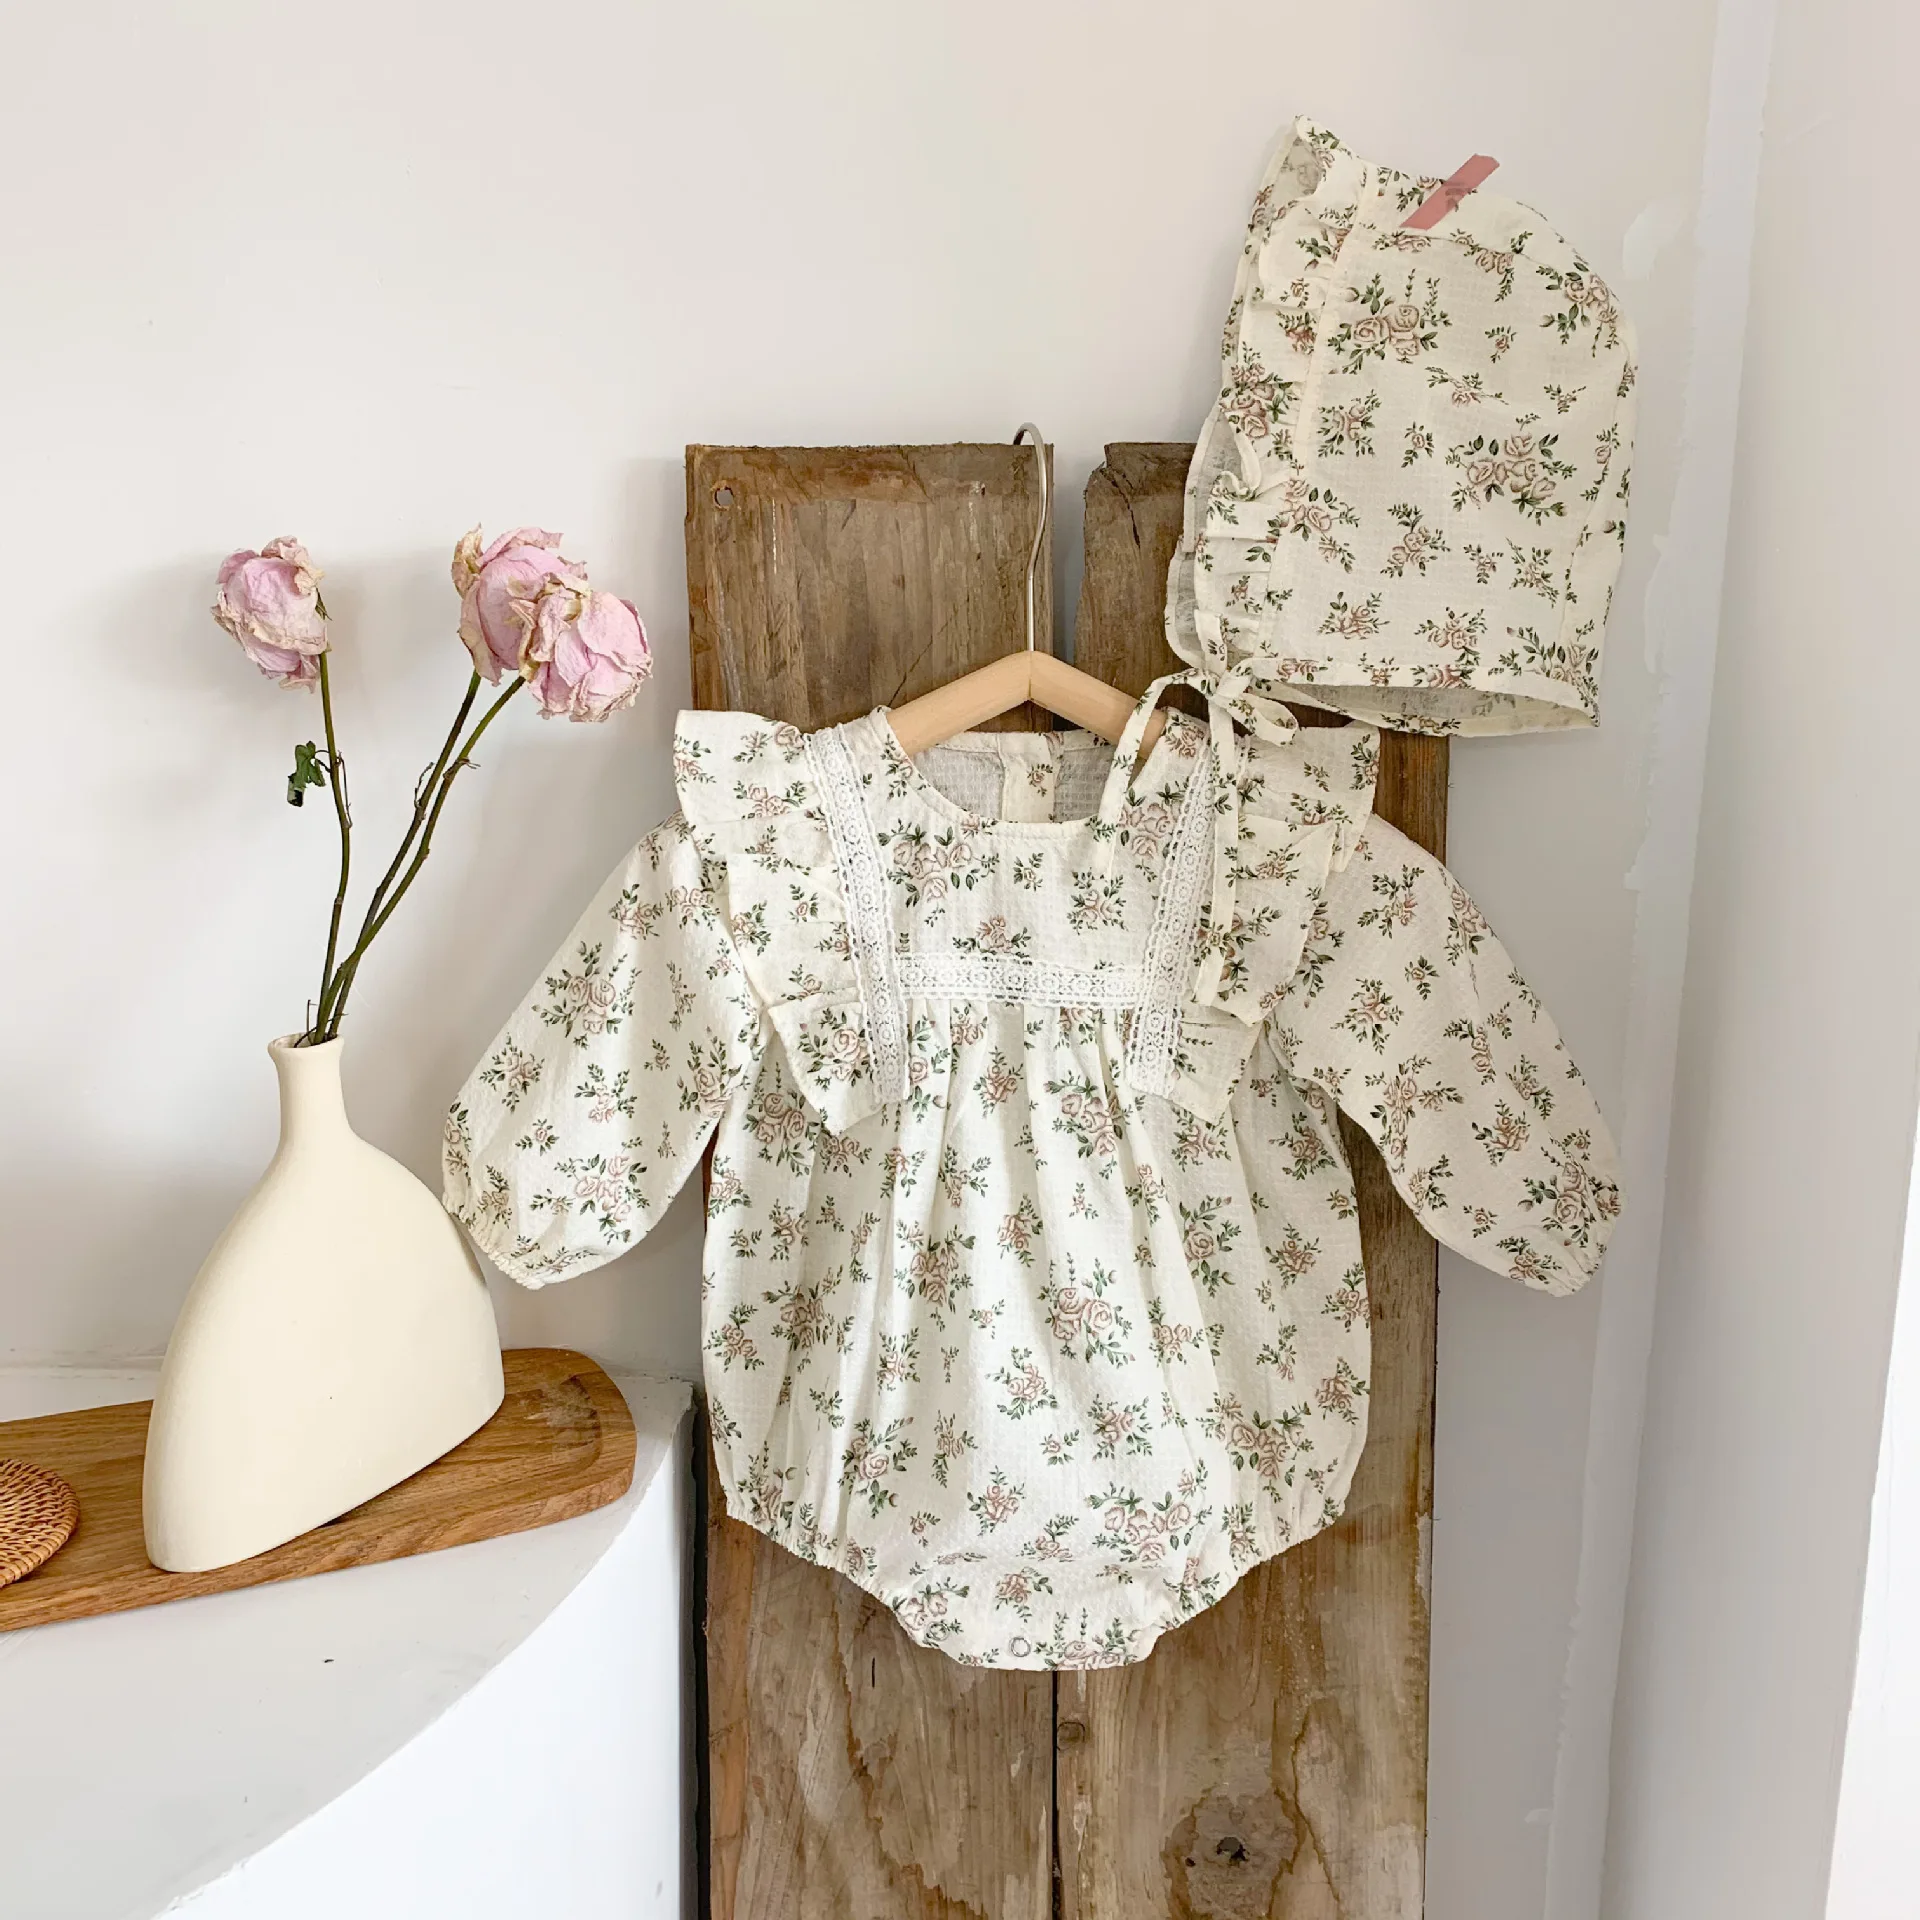 

Ins 2021 autumn baju baby, Cotton lace edge Floral print romper baby girls bodysuit, baby romper set with free hat